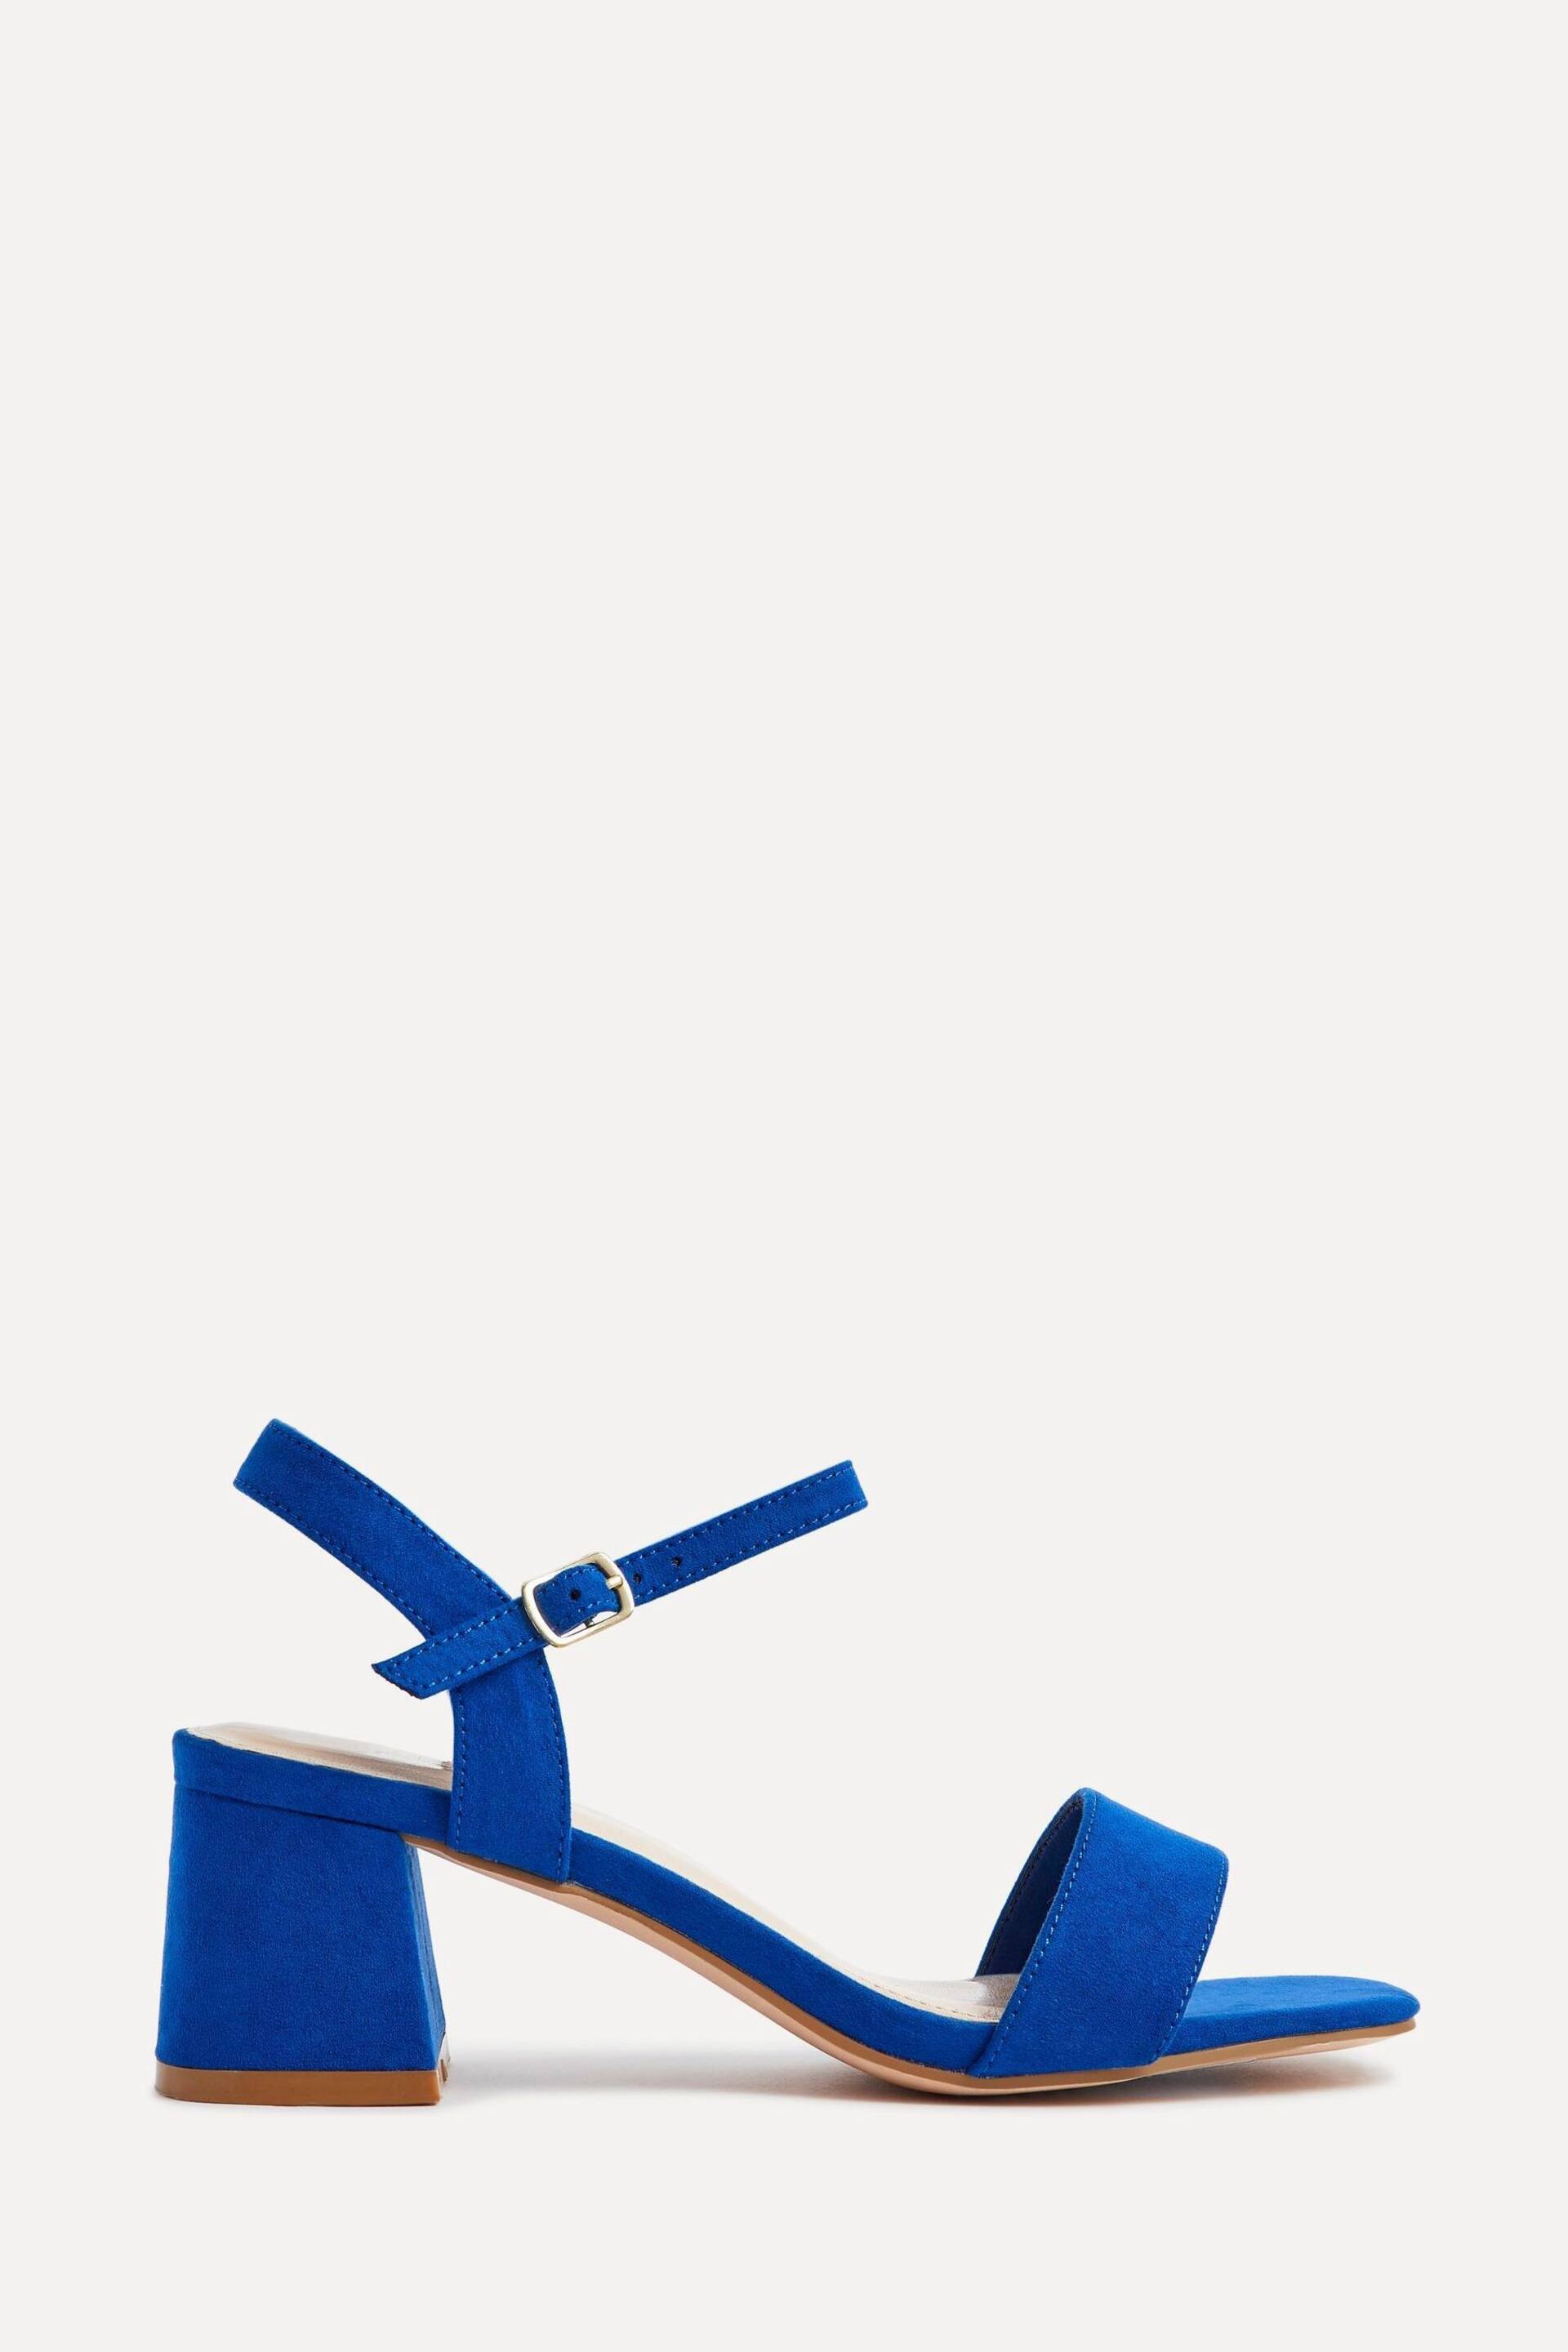 Linzi Cobalt Blue Darcie Barely There Block Heeled Sandals - Image 4 of 9